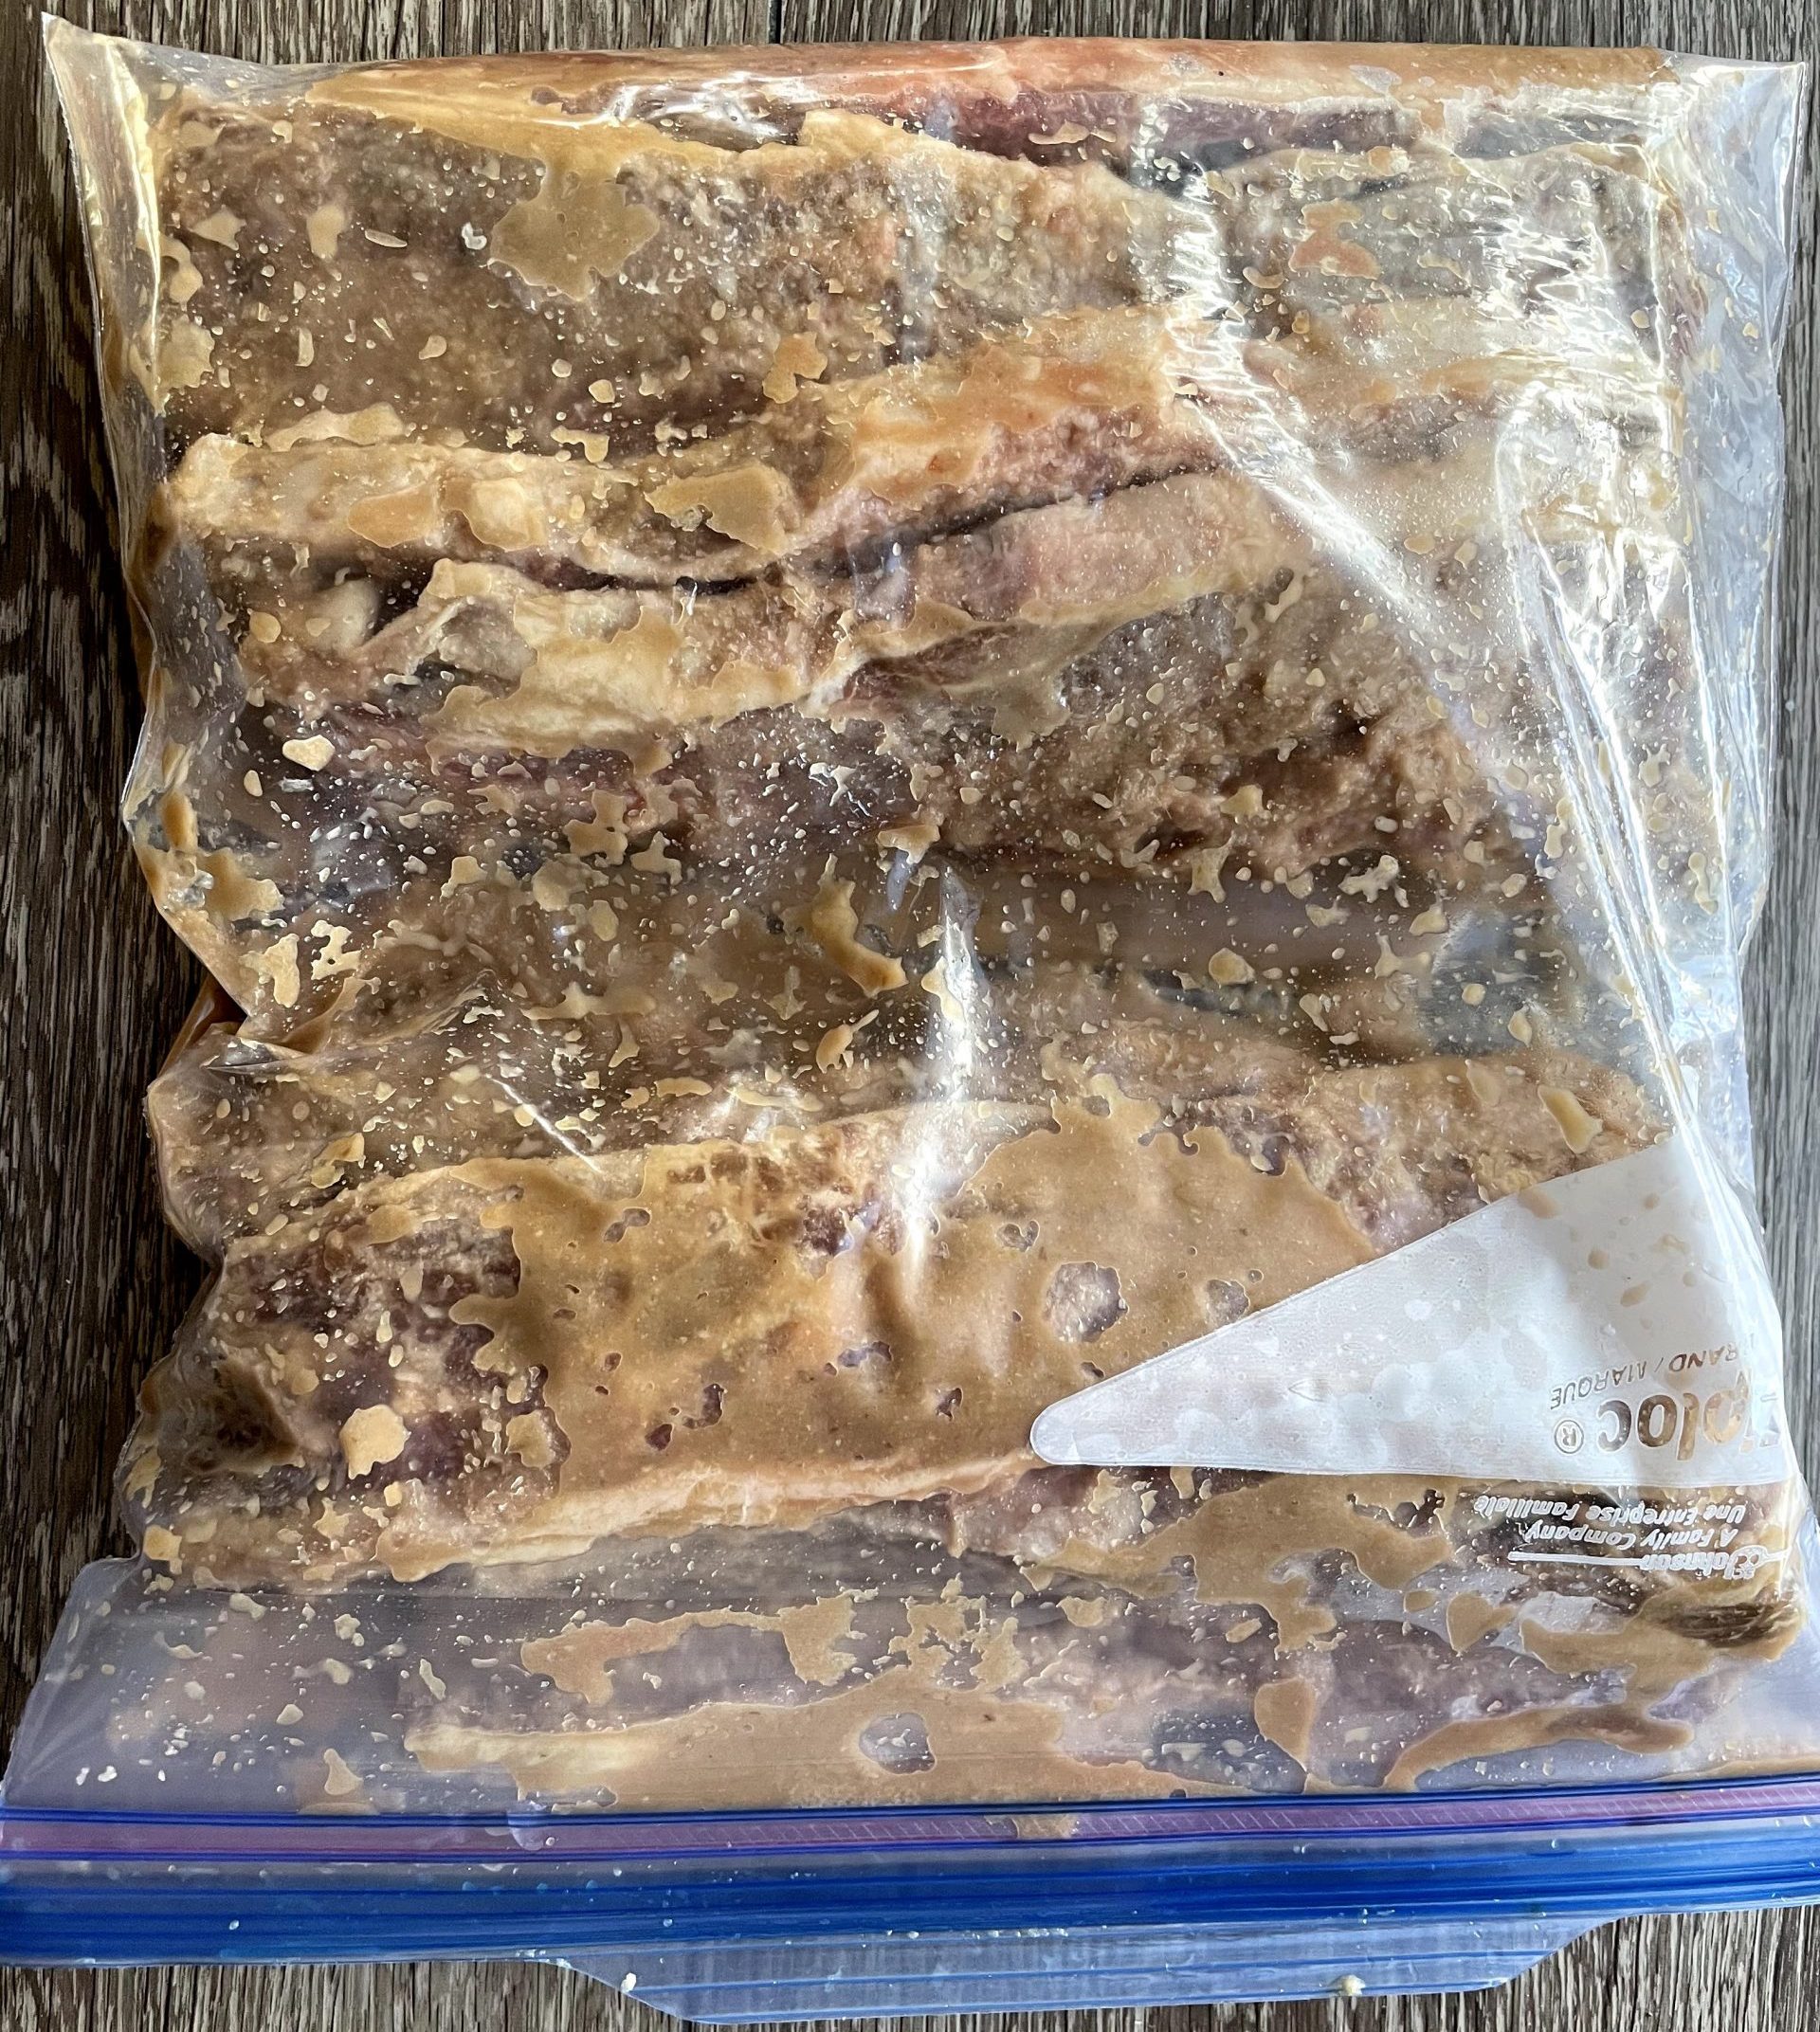 Marinated Short ribs prepped for freezing.